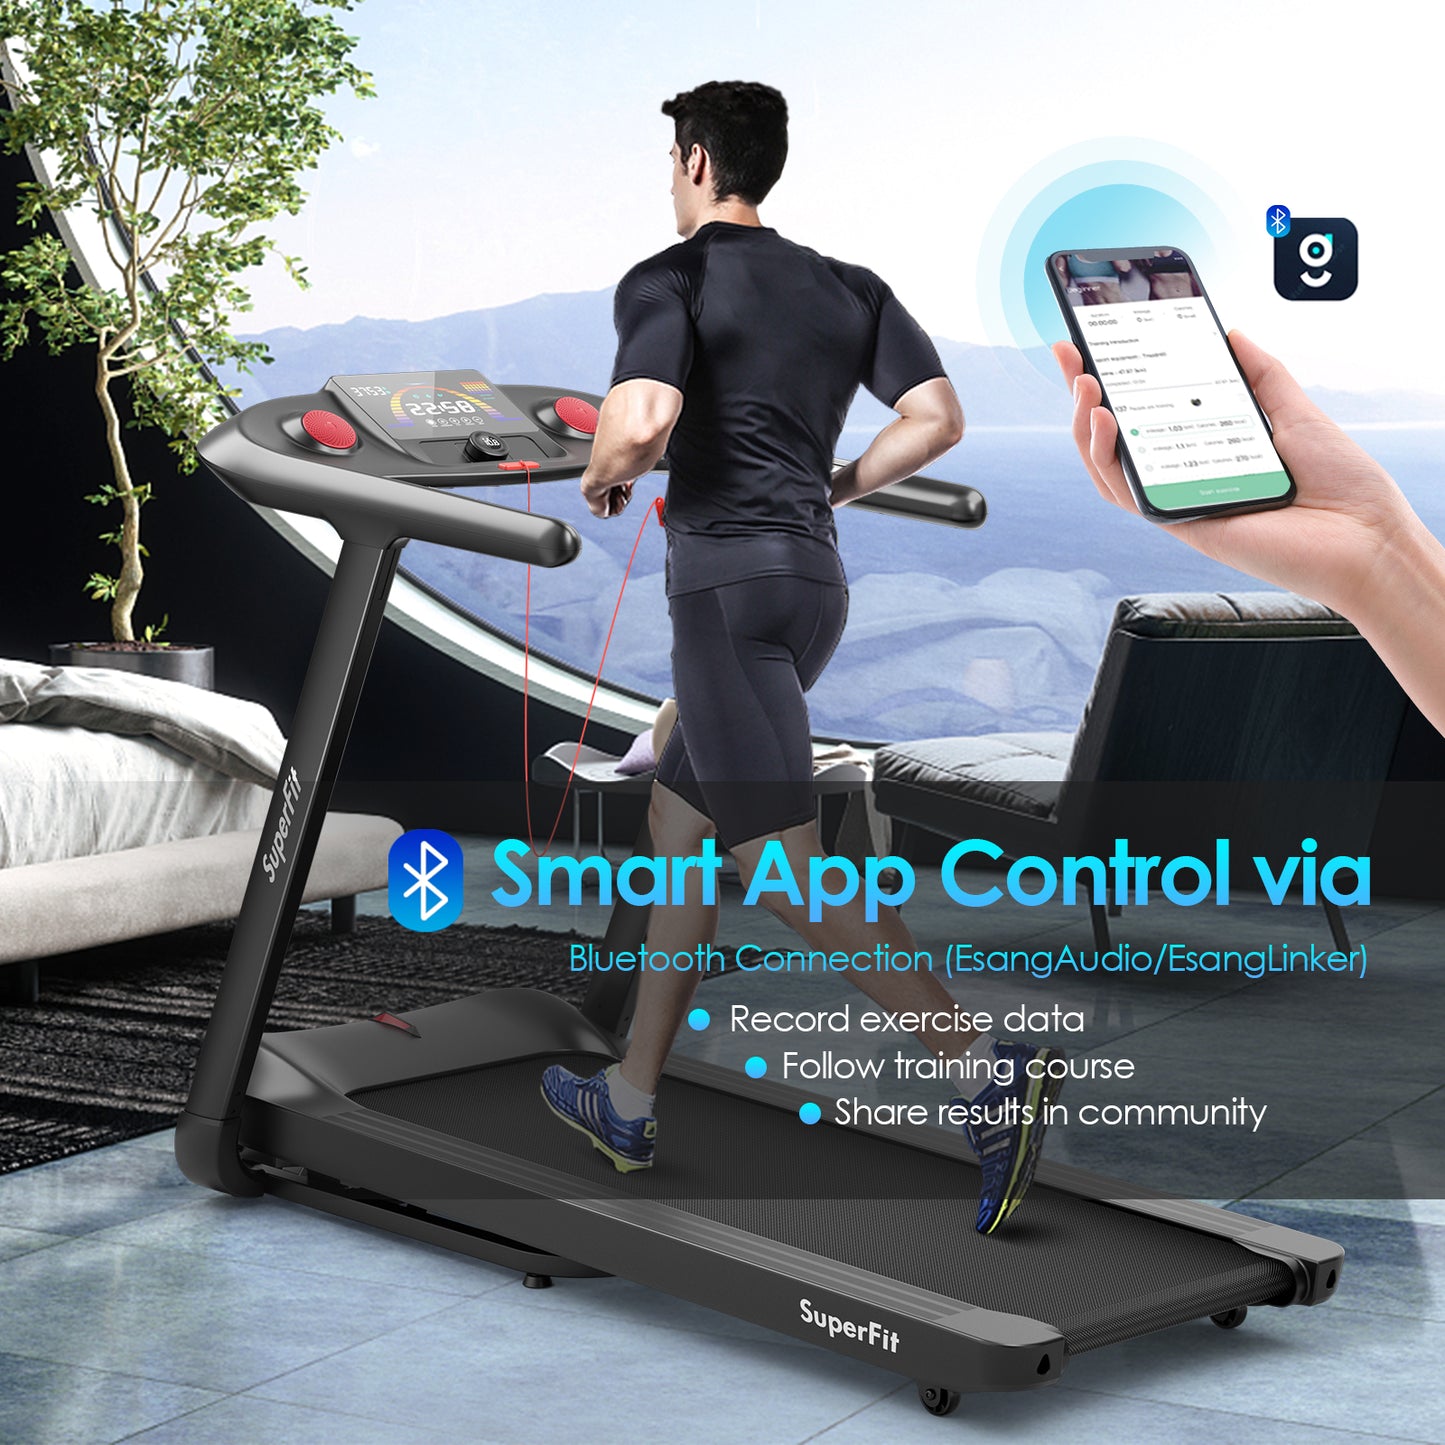 4.75HP Folding Treadmill with Preset Programs Touch Screen Control-Black